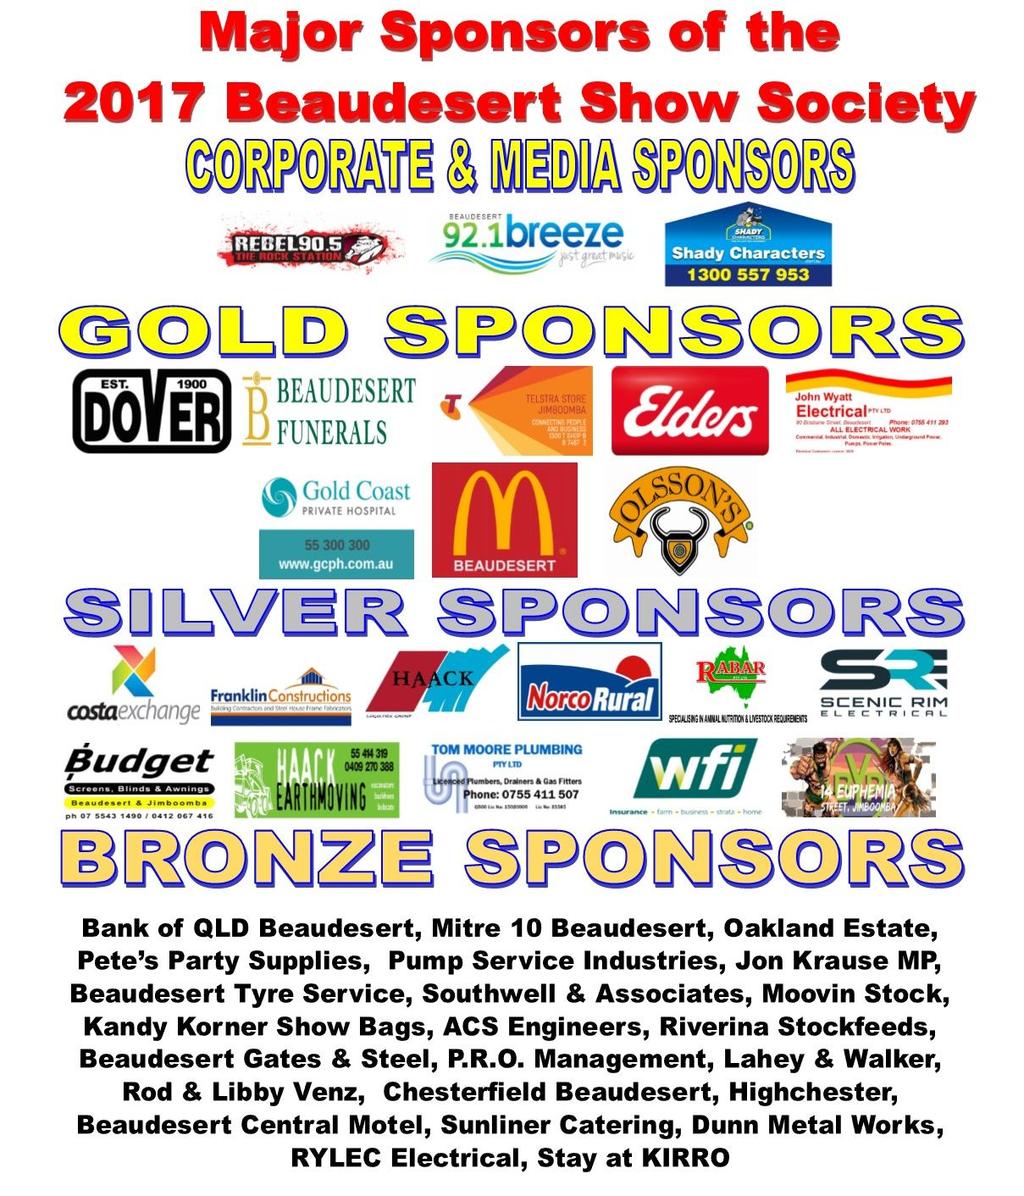 The Beaudesert Show Society extends a sincere thank you to all who sponsors and donate to all